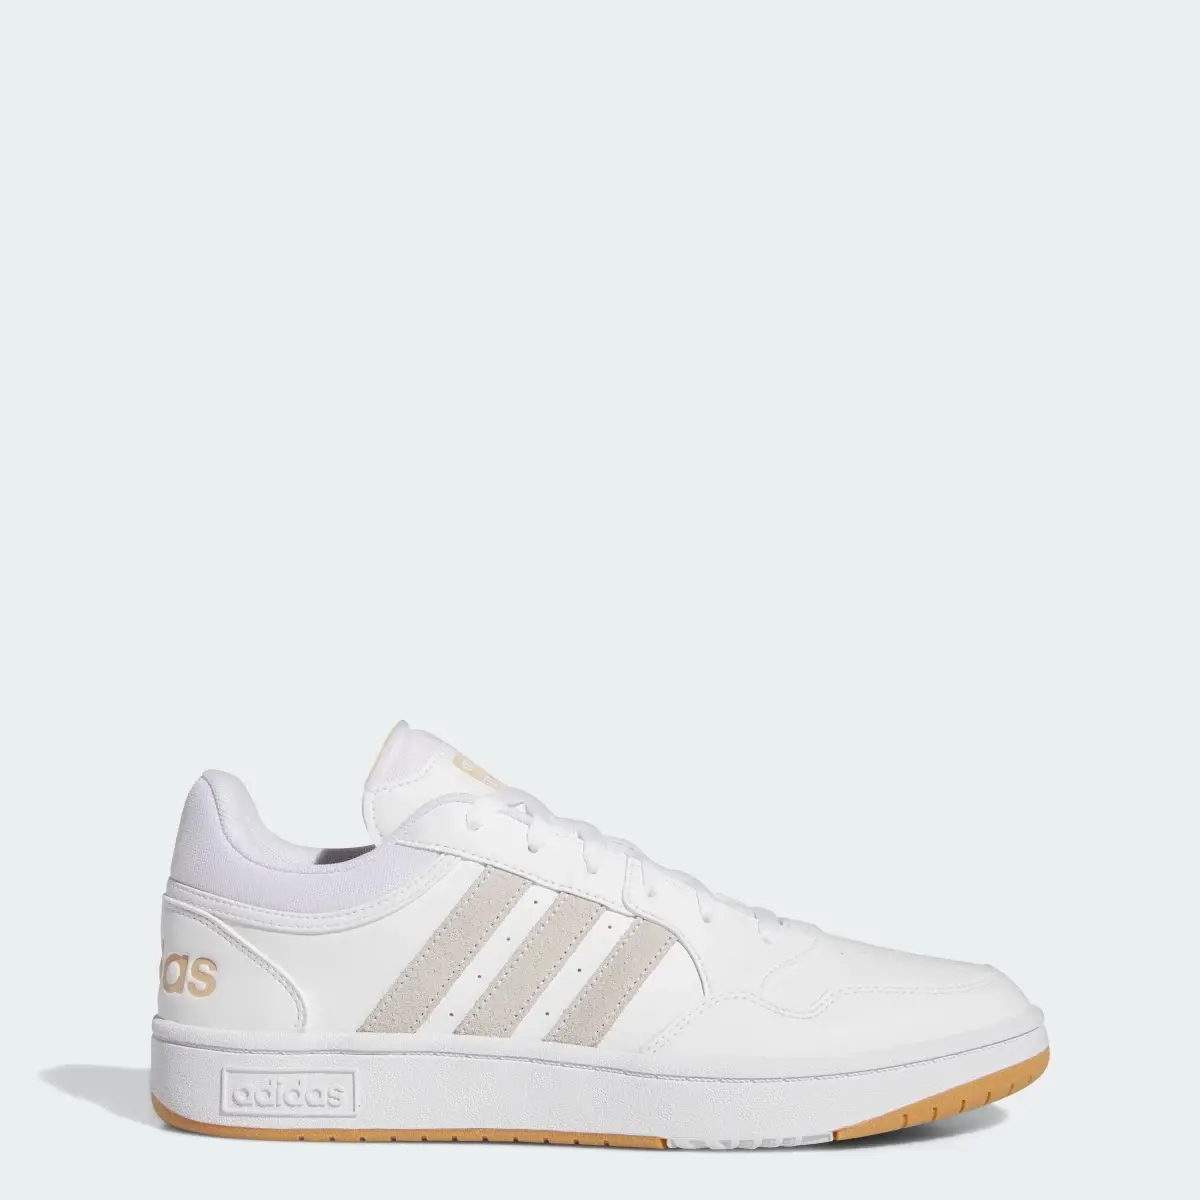 Adidas Hoops 3.0 Low Classic Vintage Shoes. 1